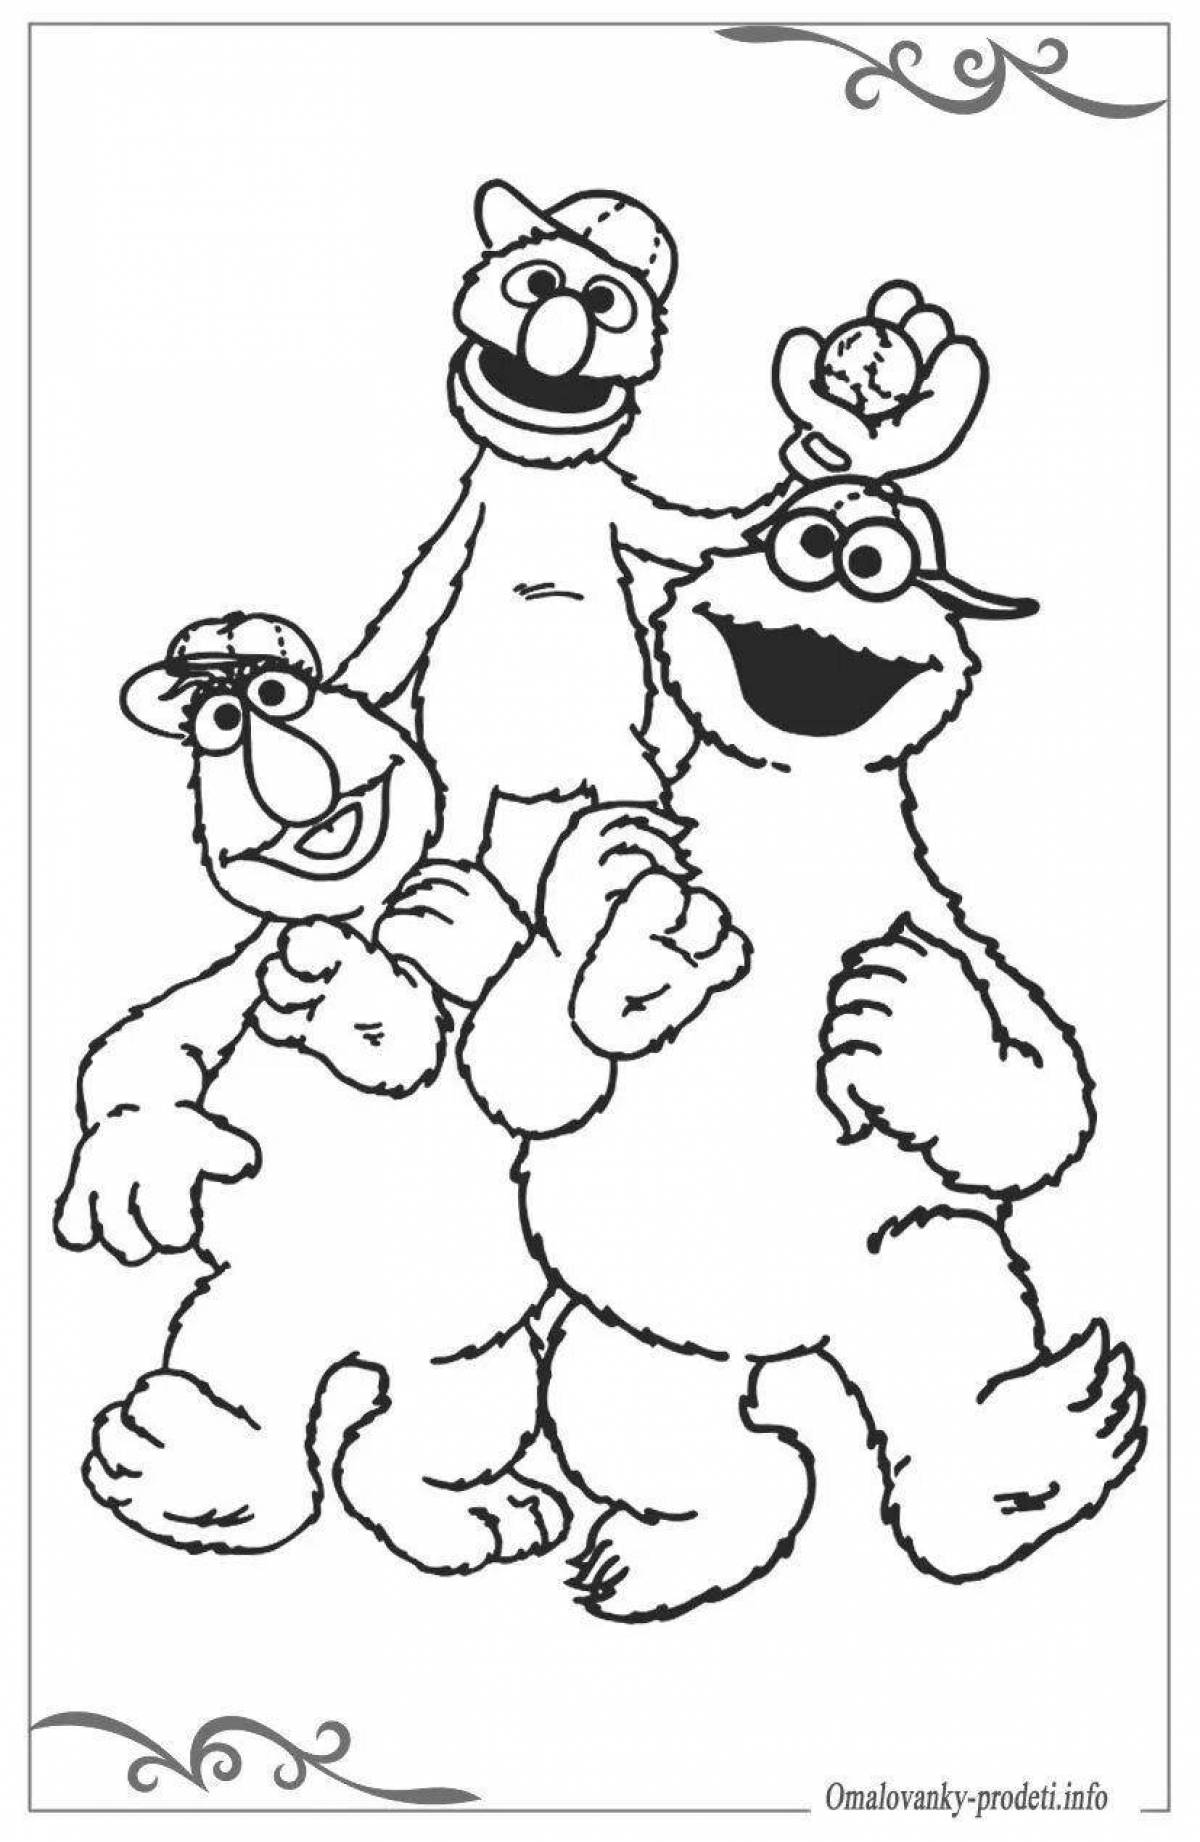 Cute sesame street coloring page